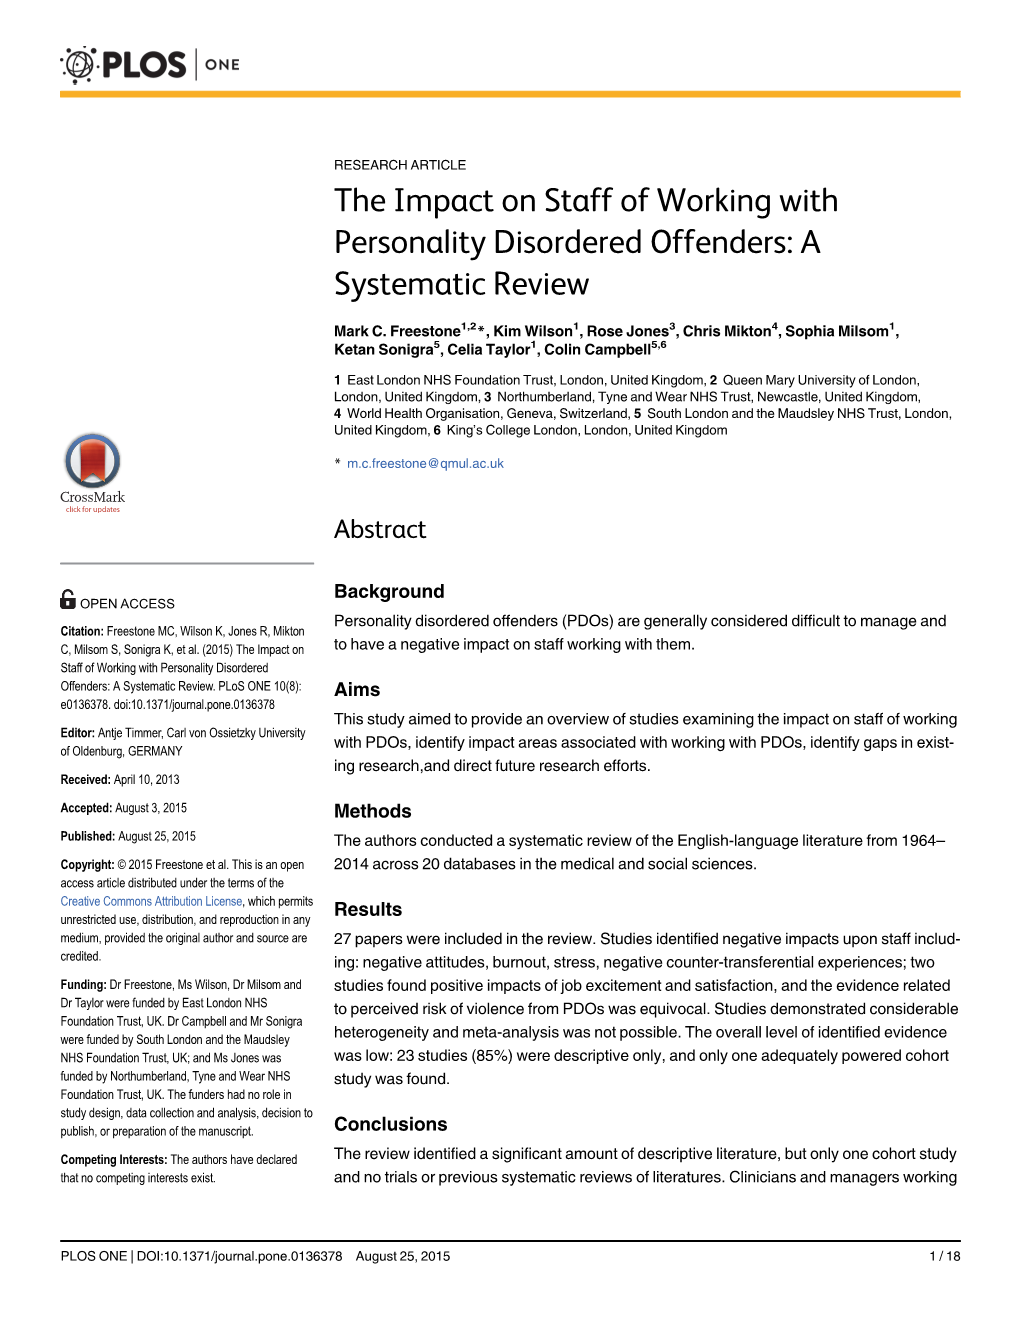 The Impact on Staff of Working with Personality Disordered Offenders: a Systematic Review